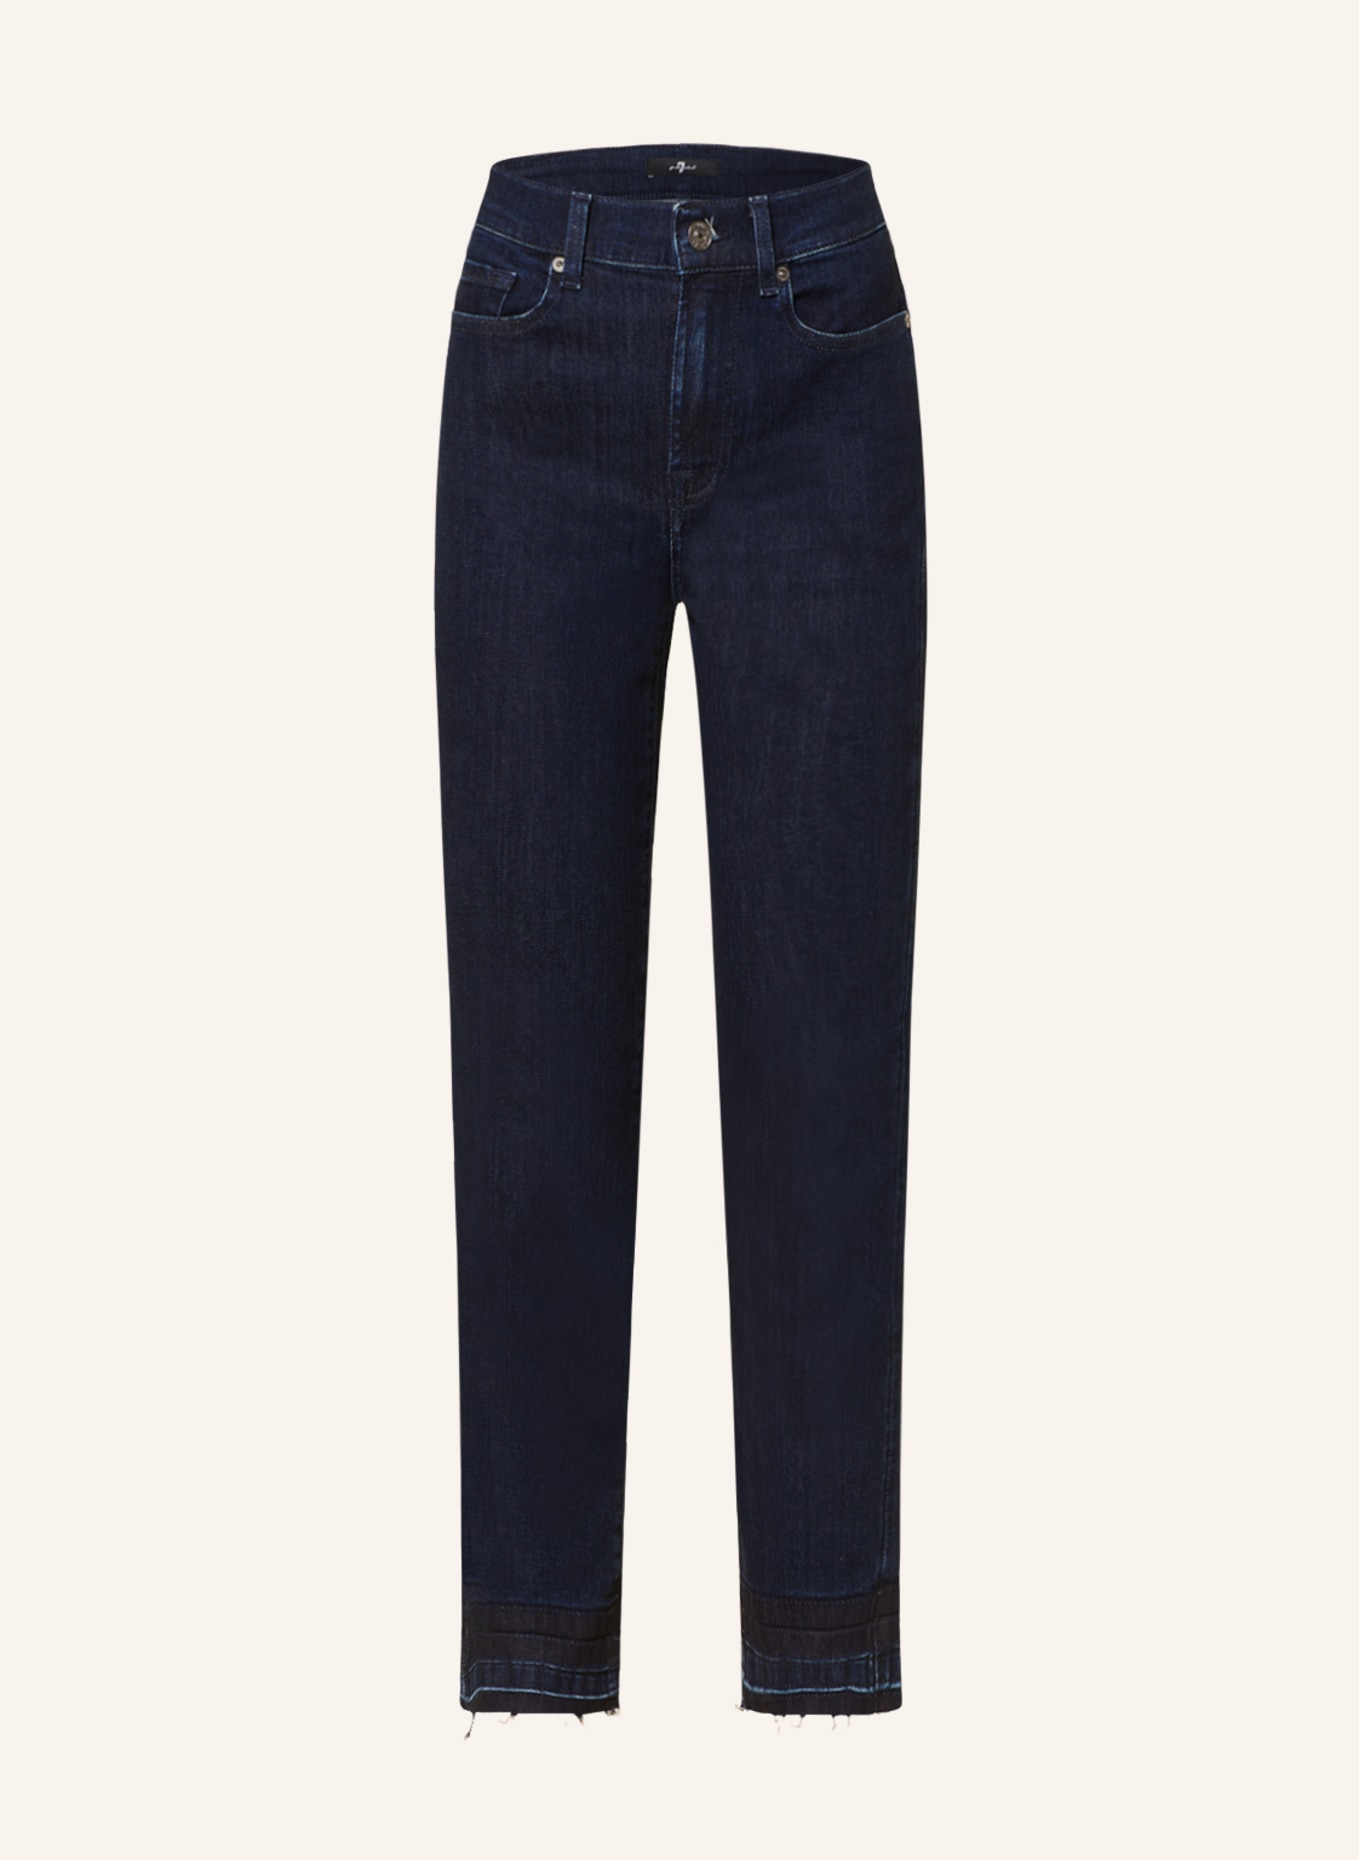 7 for all mankind 7/8-Jeans THE STRAIGHT CROP, Farbe: SS DARK BLUE (Bild 1)